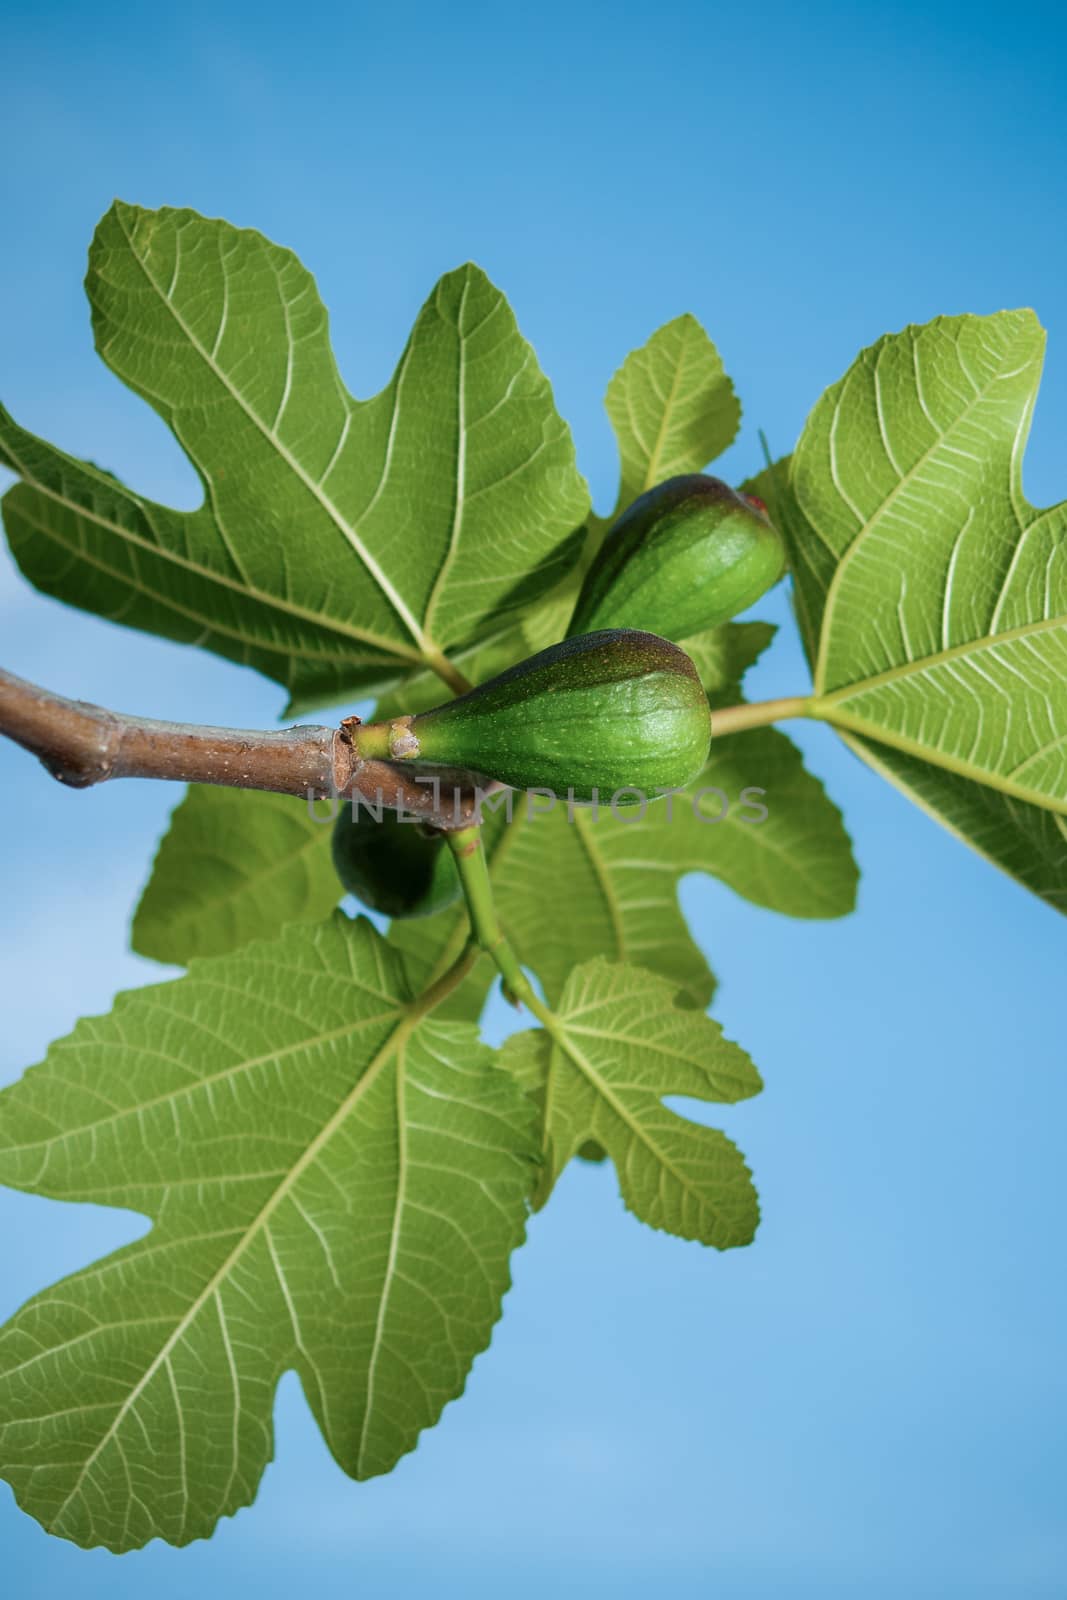 Figs in his branch in a spring day with a blue sky